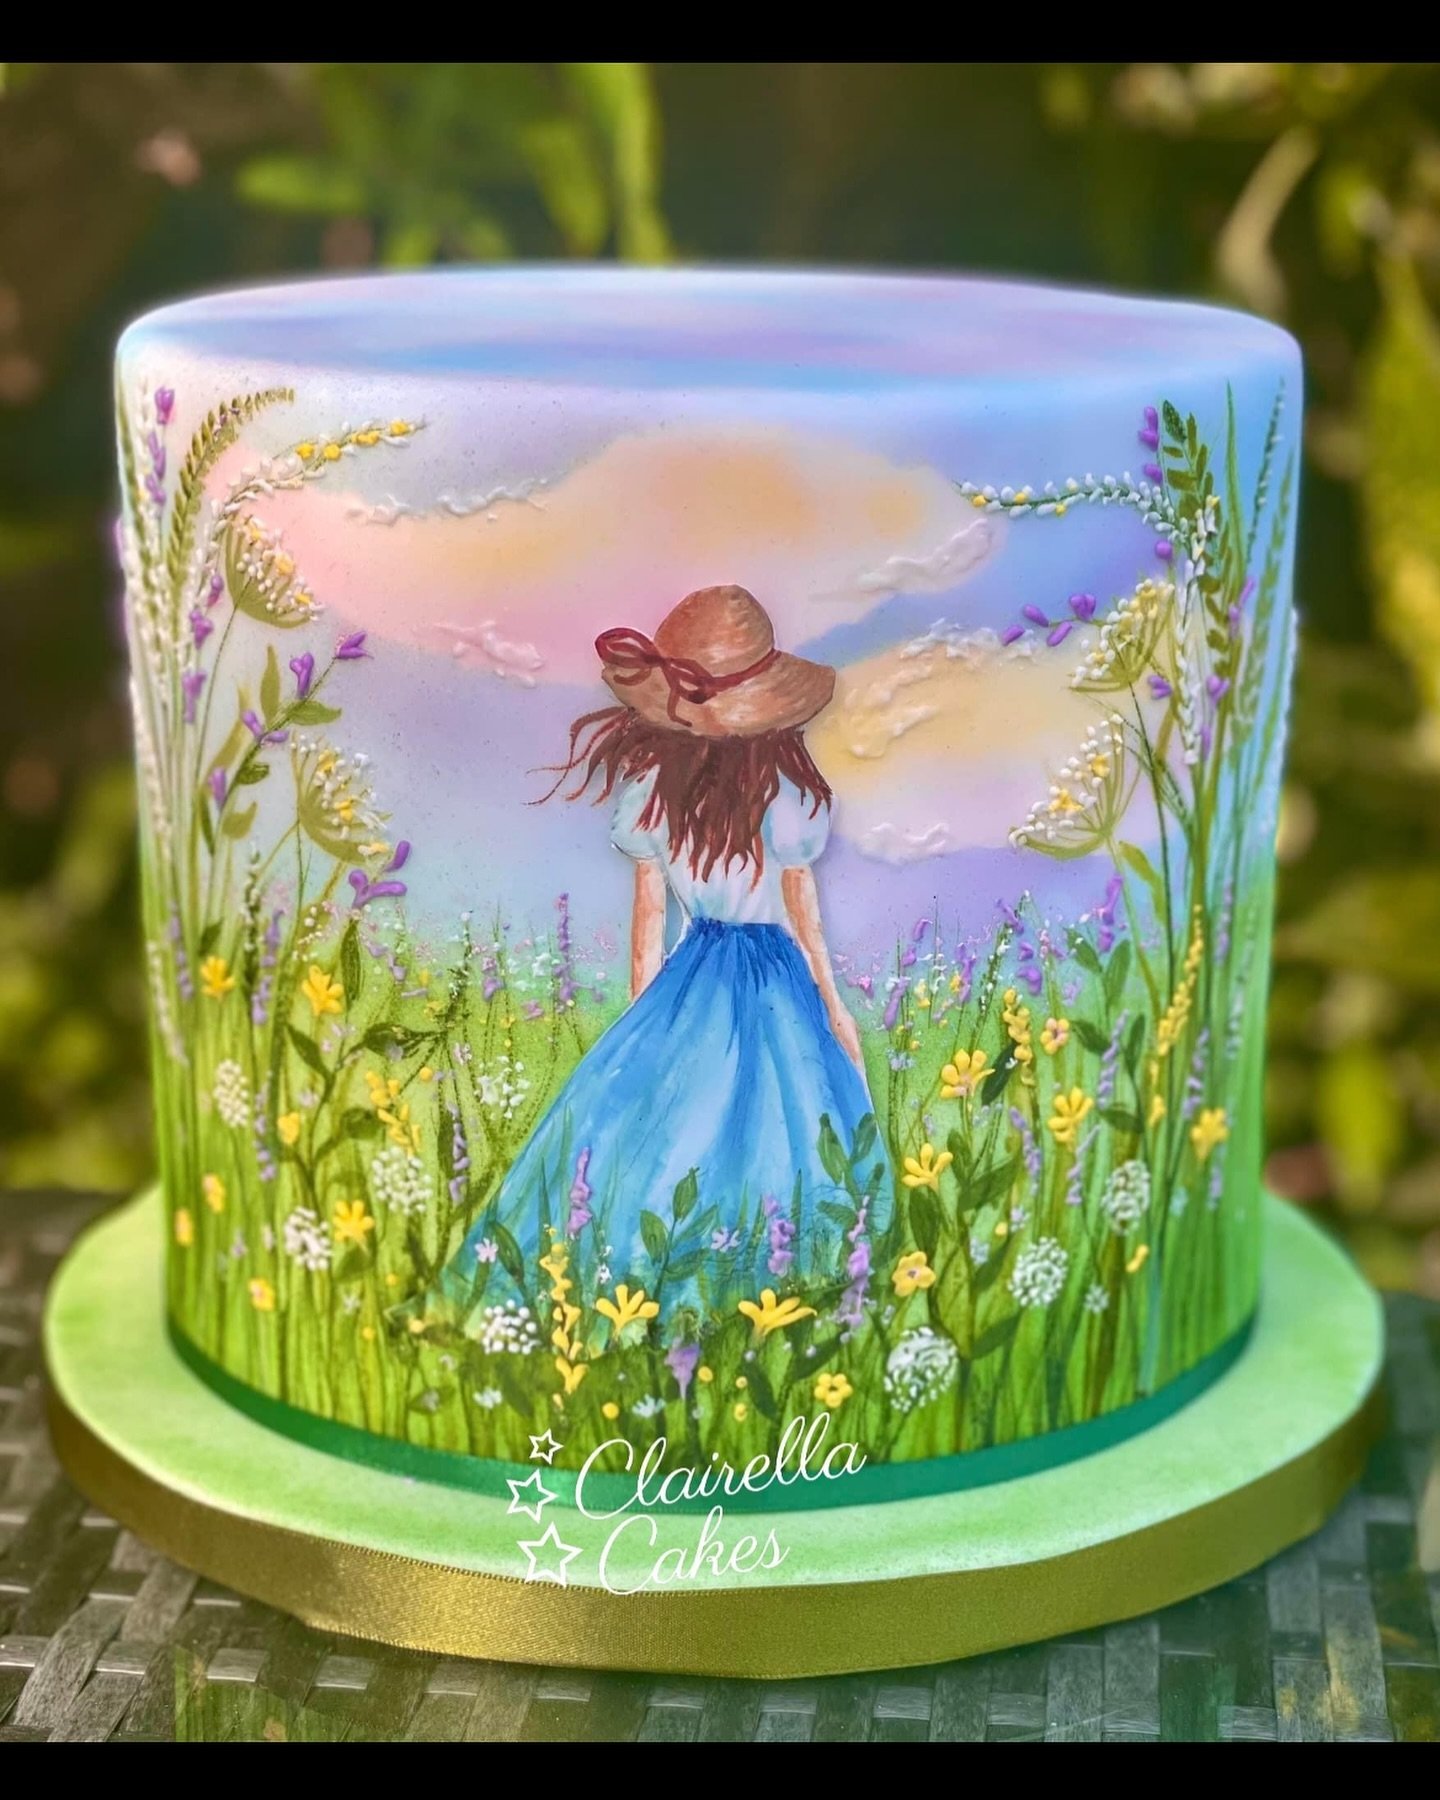 ** NEW CLASS ALERT - THE &lsquo;SUMMER MEADOW&rsquo; CLASS**
(in Essex UK)

Are you scared of airbrushing, hand painting &amp; royal icing??? 
Well look no further this is the class for YOU!  This class is aimed at Beginners &amp; Improvers &amp; for